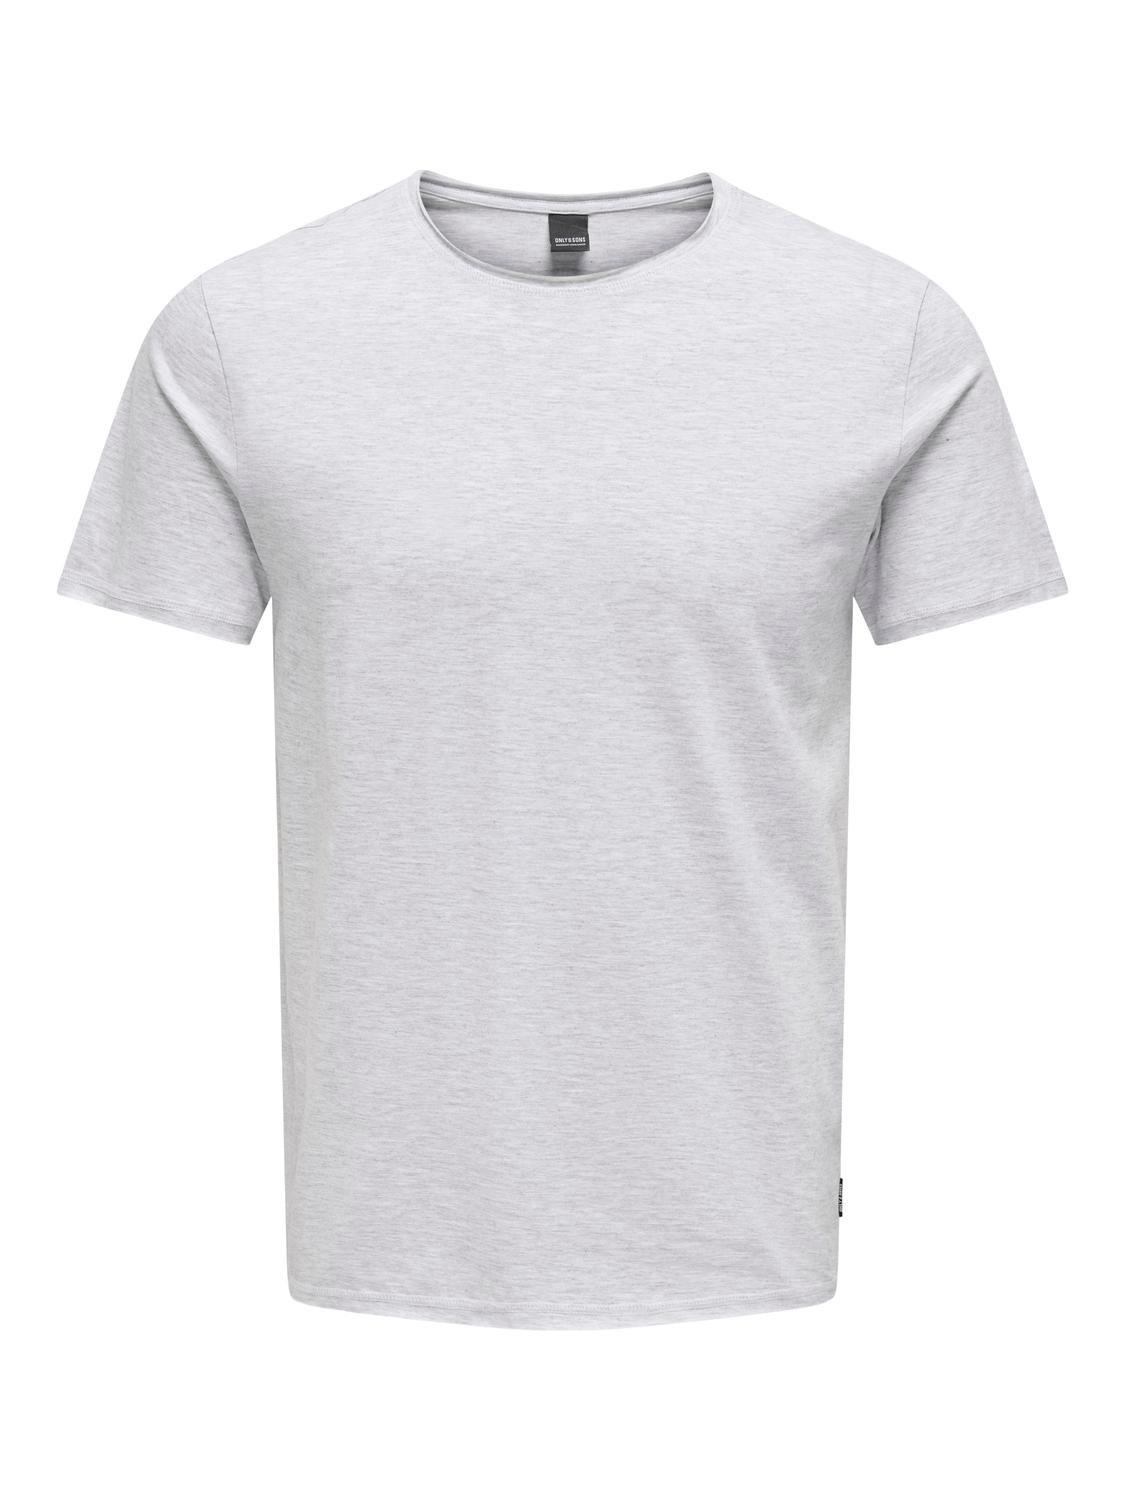 ONLY & SONS O-hals t-shirt -White - 22005108